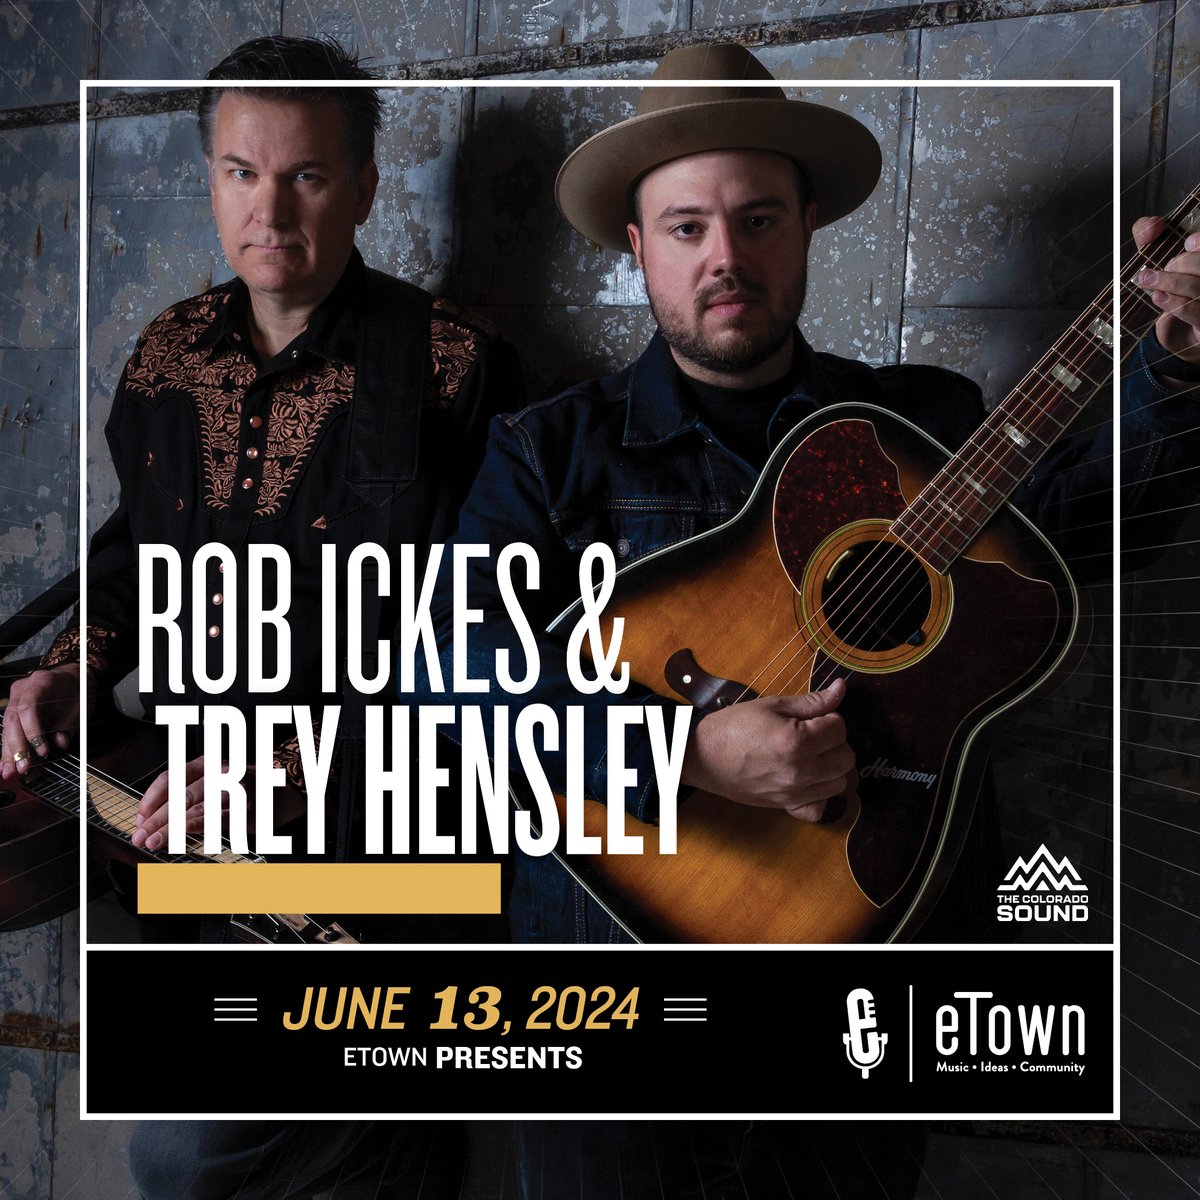 🚨Just Added🚨 We're so excited to welcome 15-time @IntlBluegrass Dobro Player of the Year, Rob Ickes, and Tennessee-born guitar prodigy, Trey Hensley, to eTown Hall on June 13th for an evening of music! Tickets: eventbrite.com/e/rob-ickes-tr…